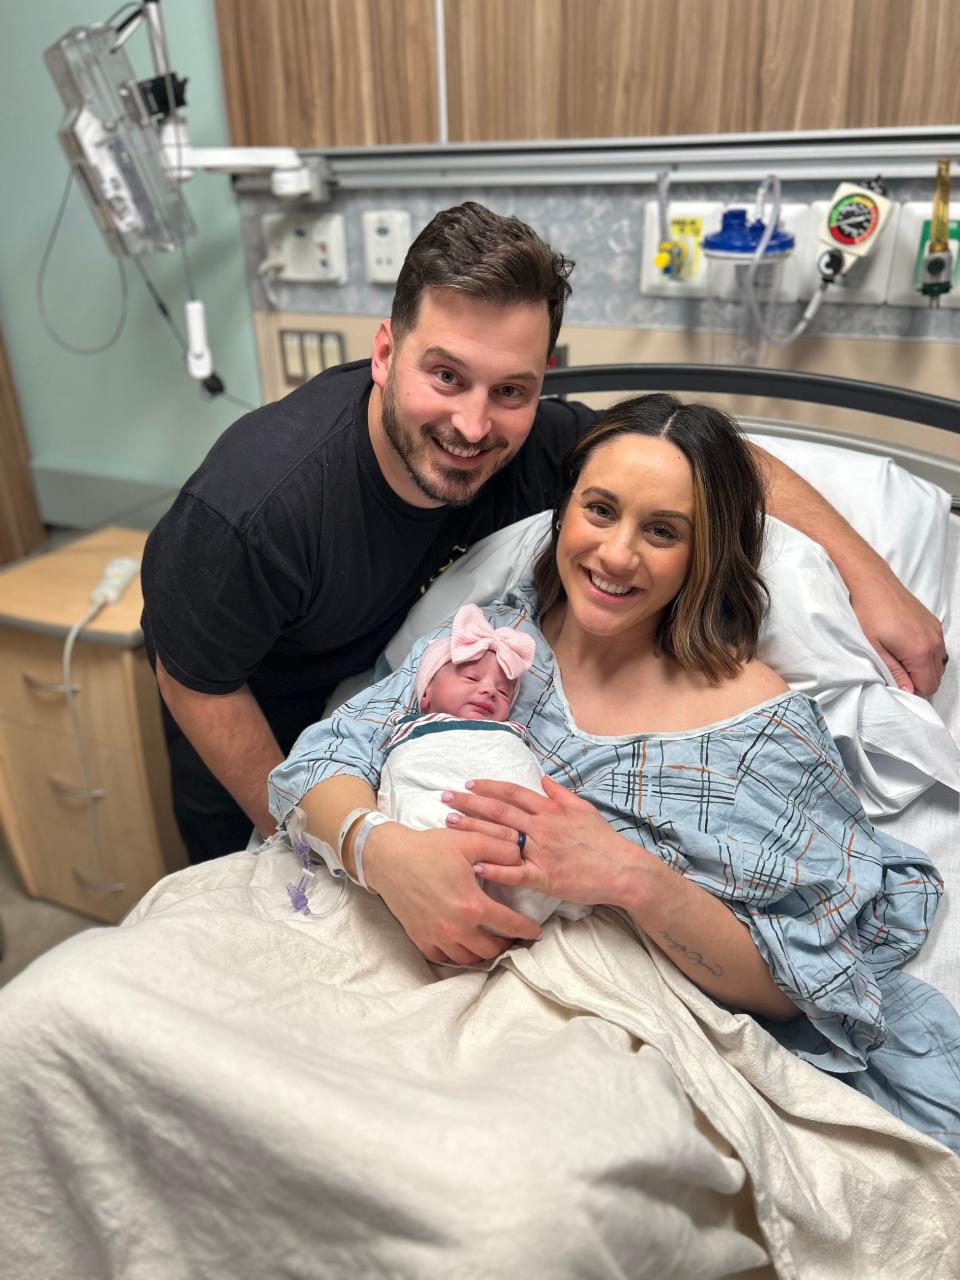 Nicole and Chris DiMicco of Lacey welcomed their baby girl Maren at 12:11 a.m. on Jan. 1, 2024 at Jersey Shore University Medical Center in Neptune.